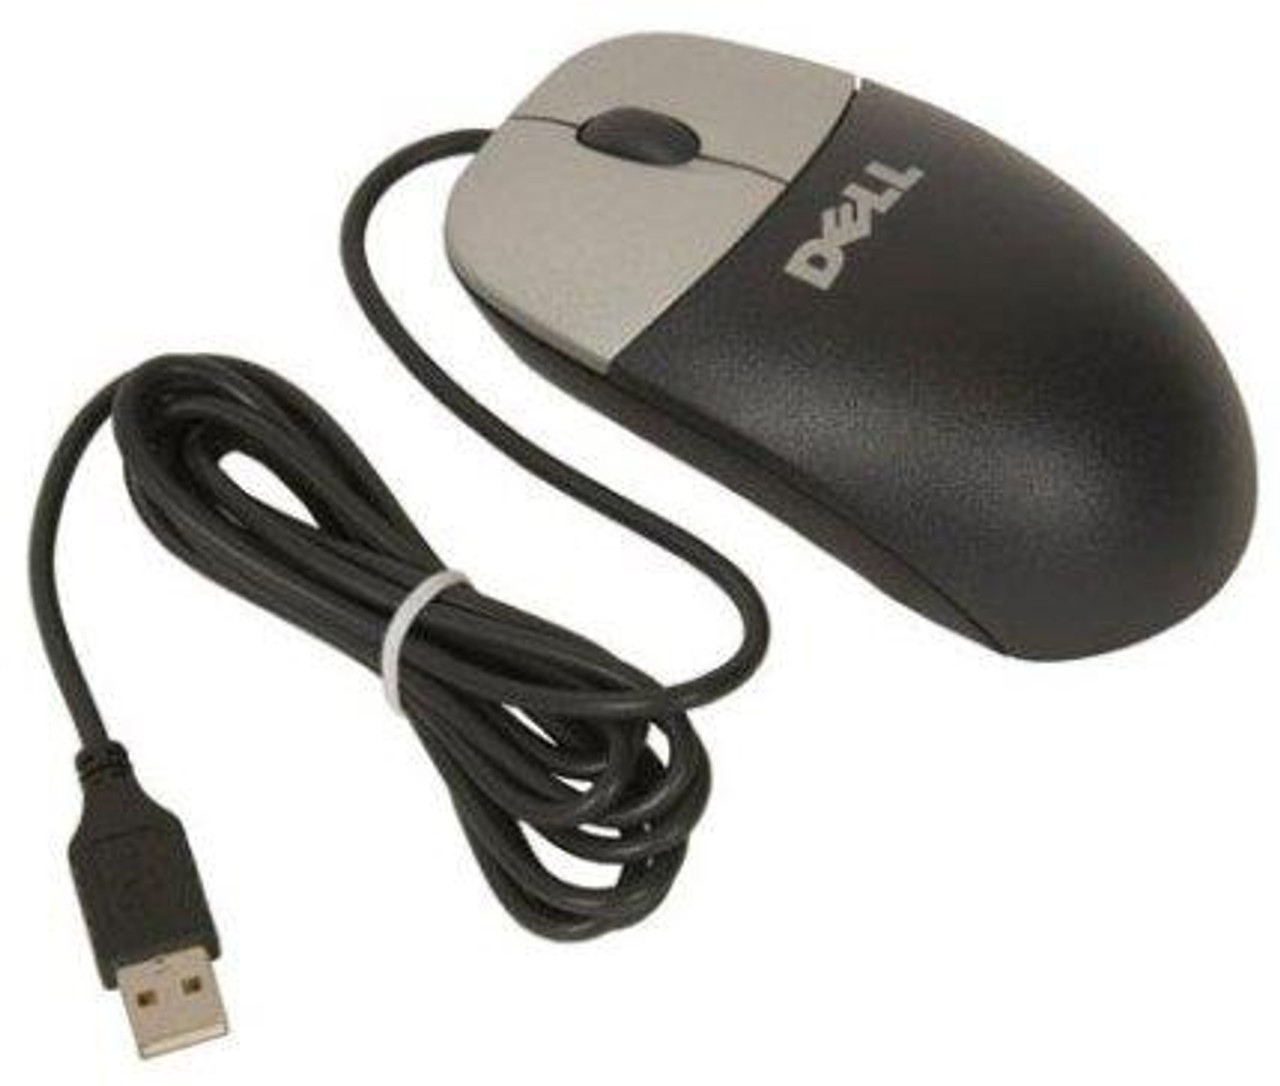 DJ301 - Dell USB Scroll Optical Mouse Black and Silver